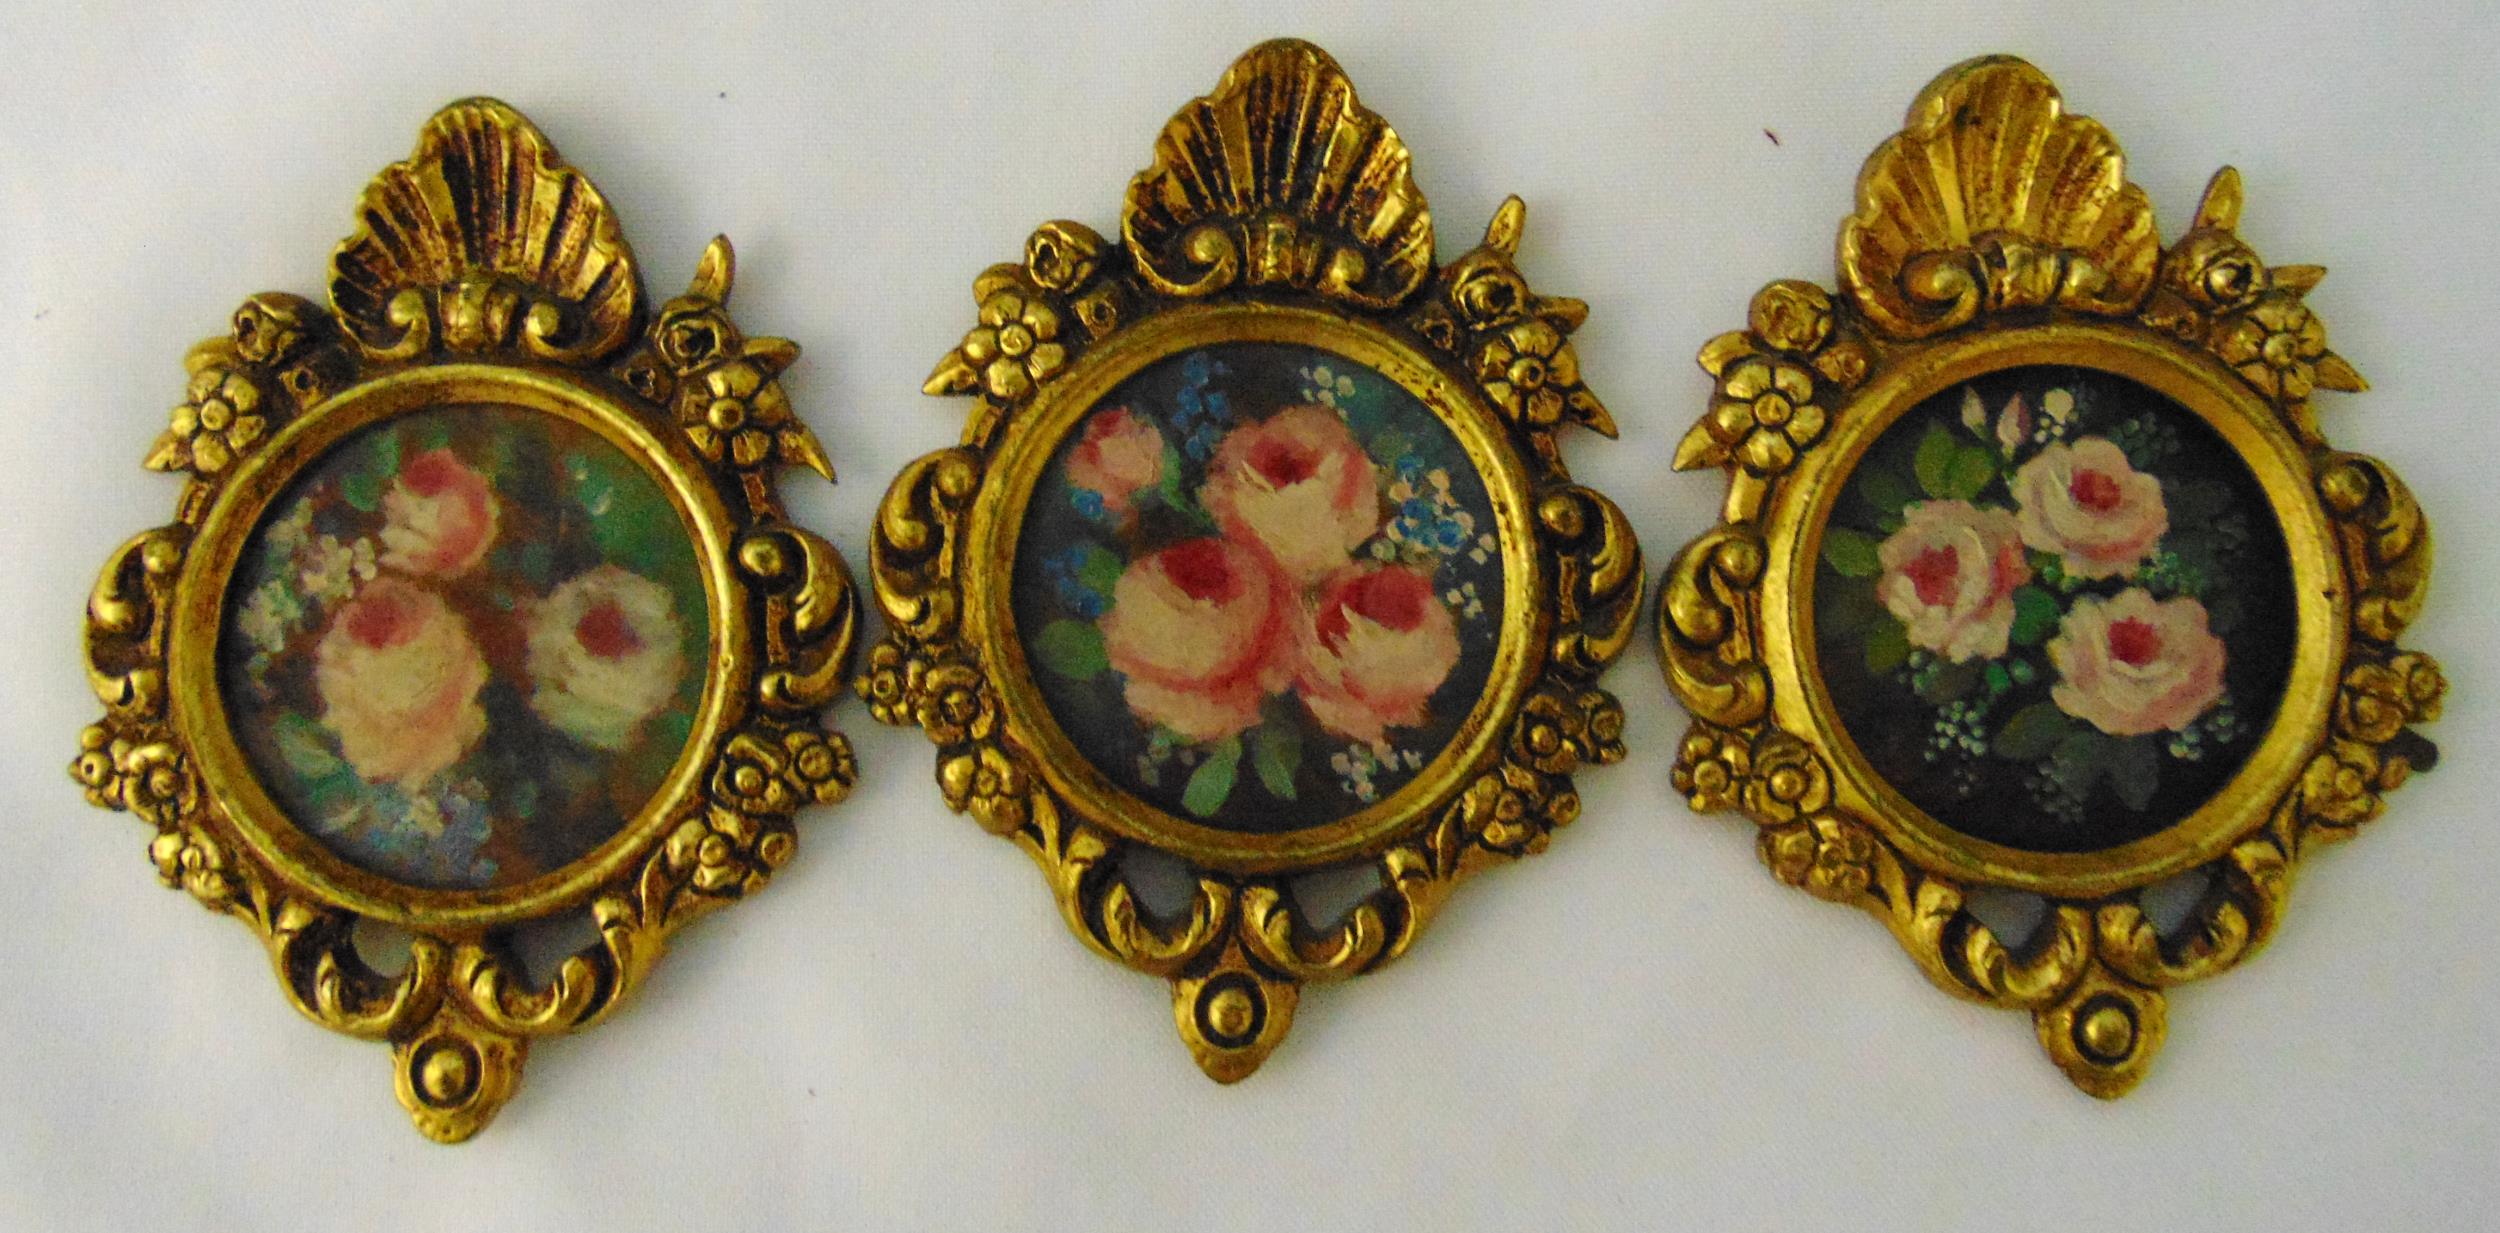 Three gilt metal wall plaques decorated with flowers and leaves, each 11x 8cm